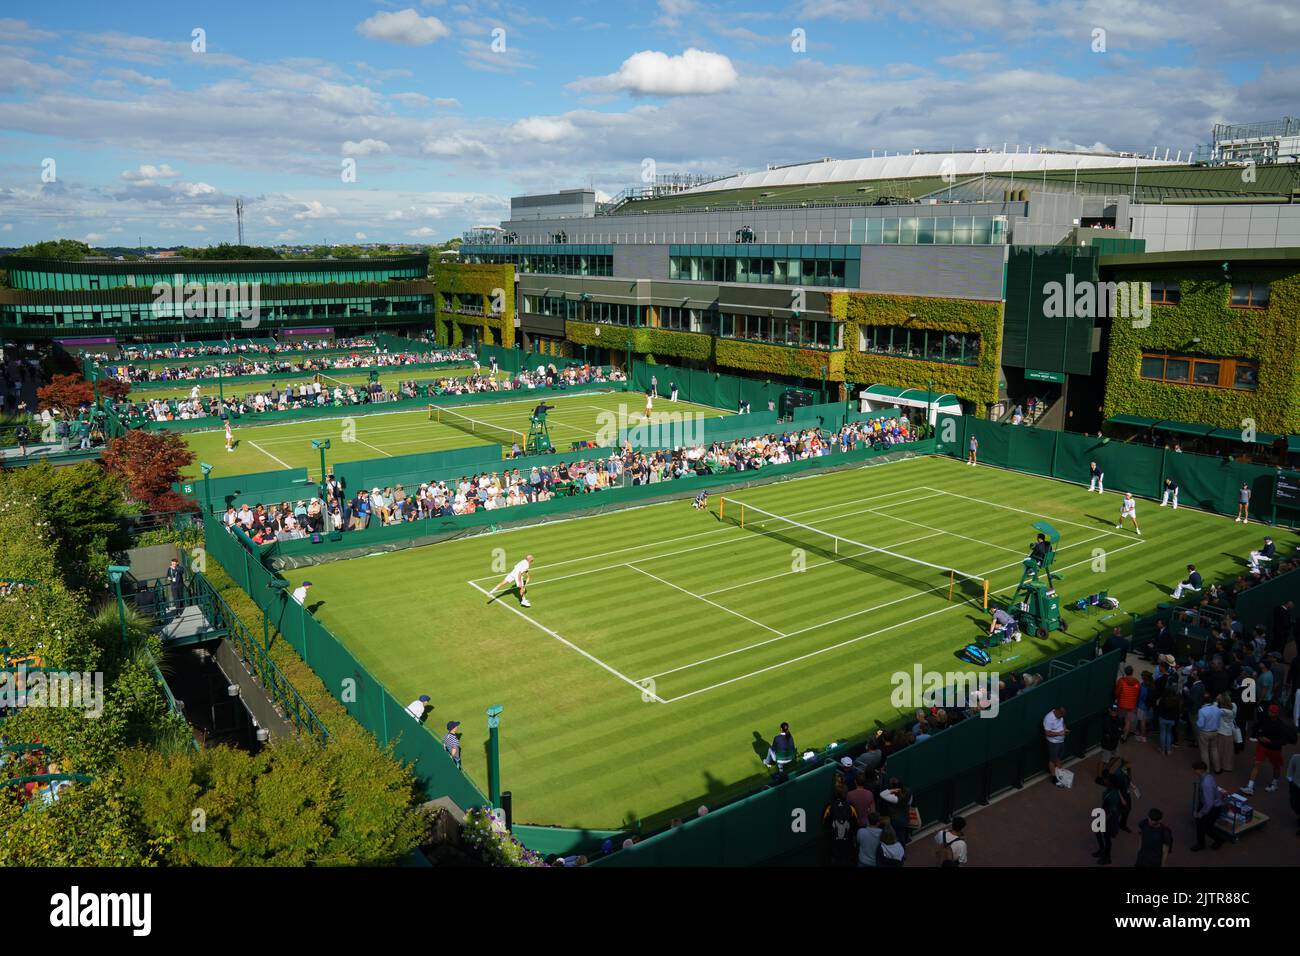 General Views of Court 14 with Adrian Mannarino and Max Purcell at The Championships 2022. Held at The All England Lawn Tennis Club, Wimbledon. Stock Photo